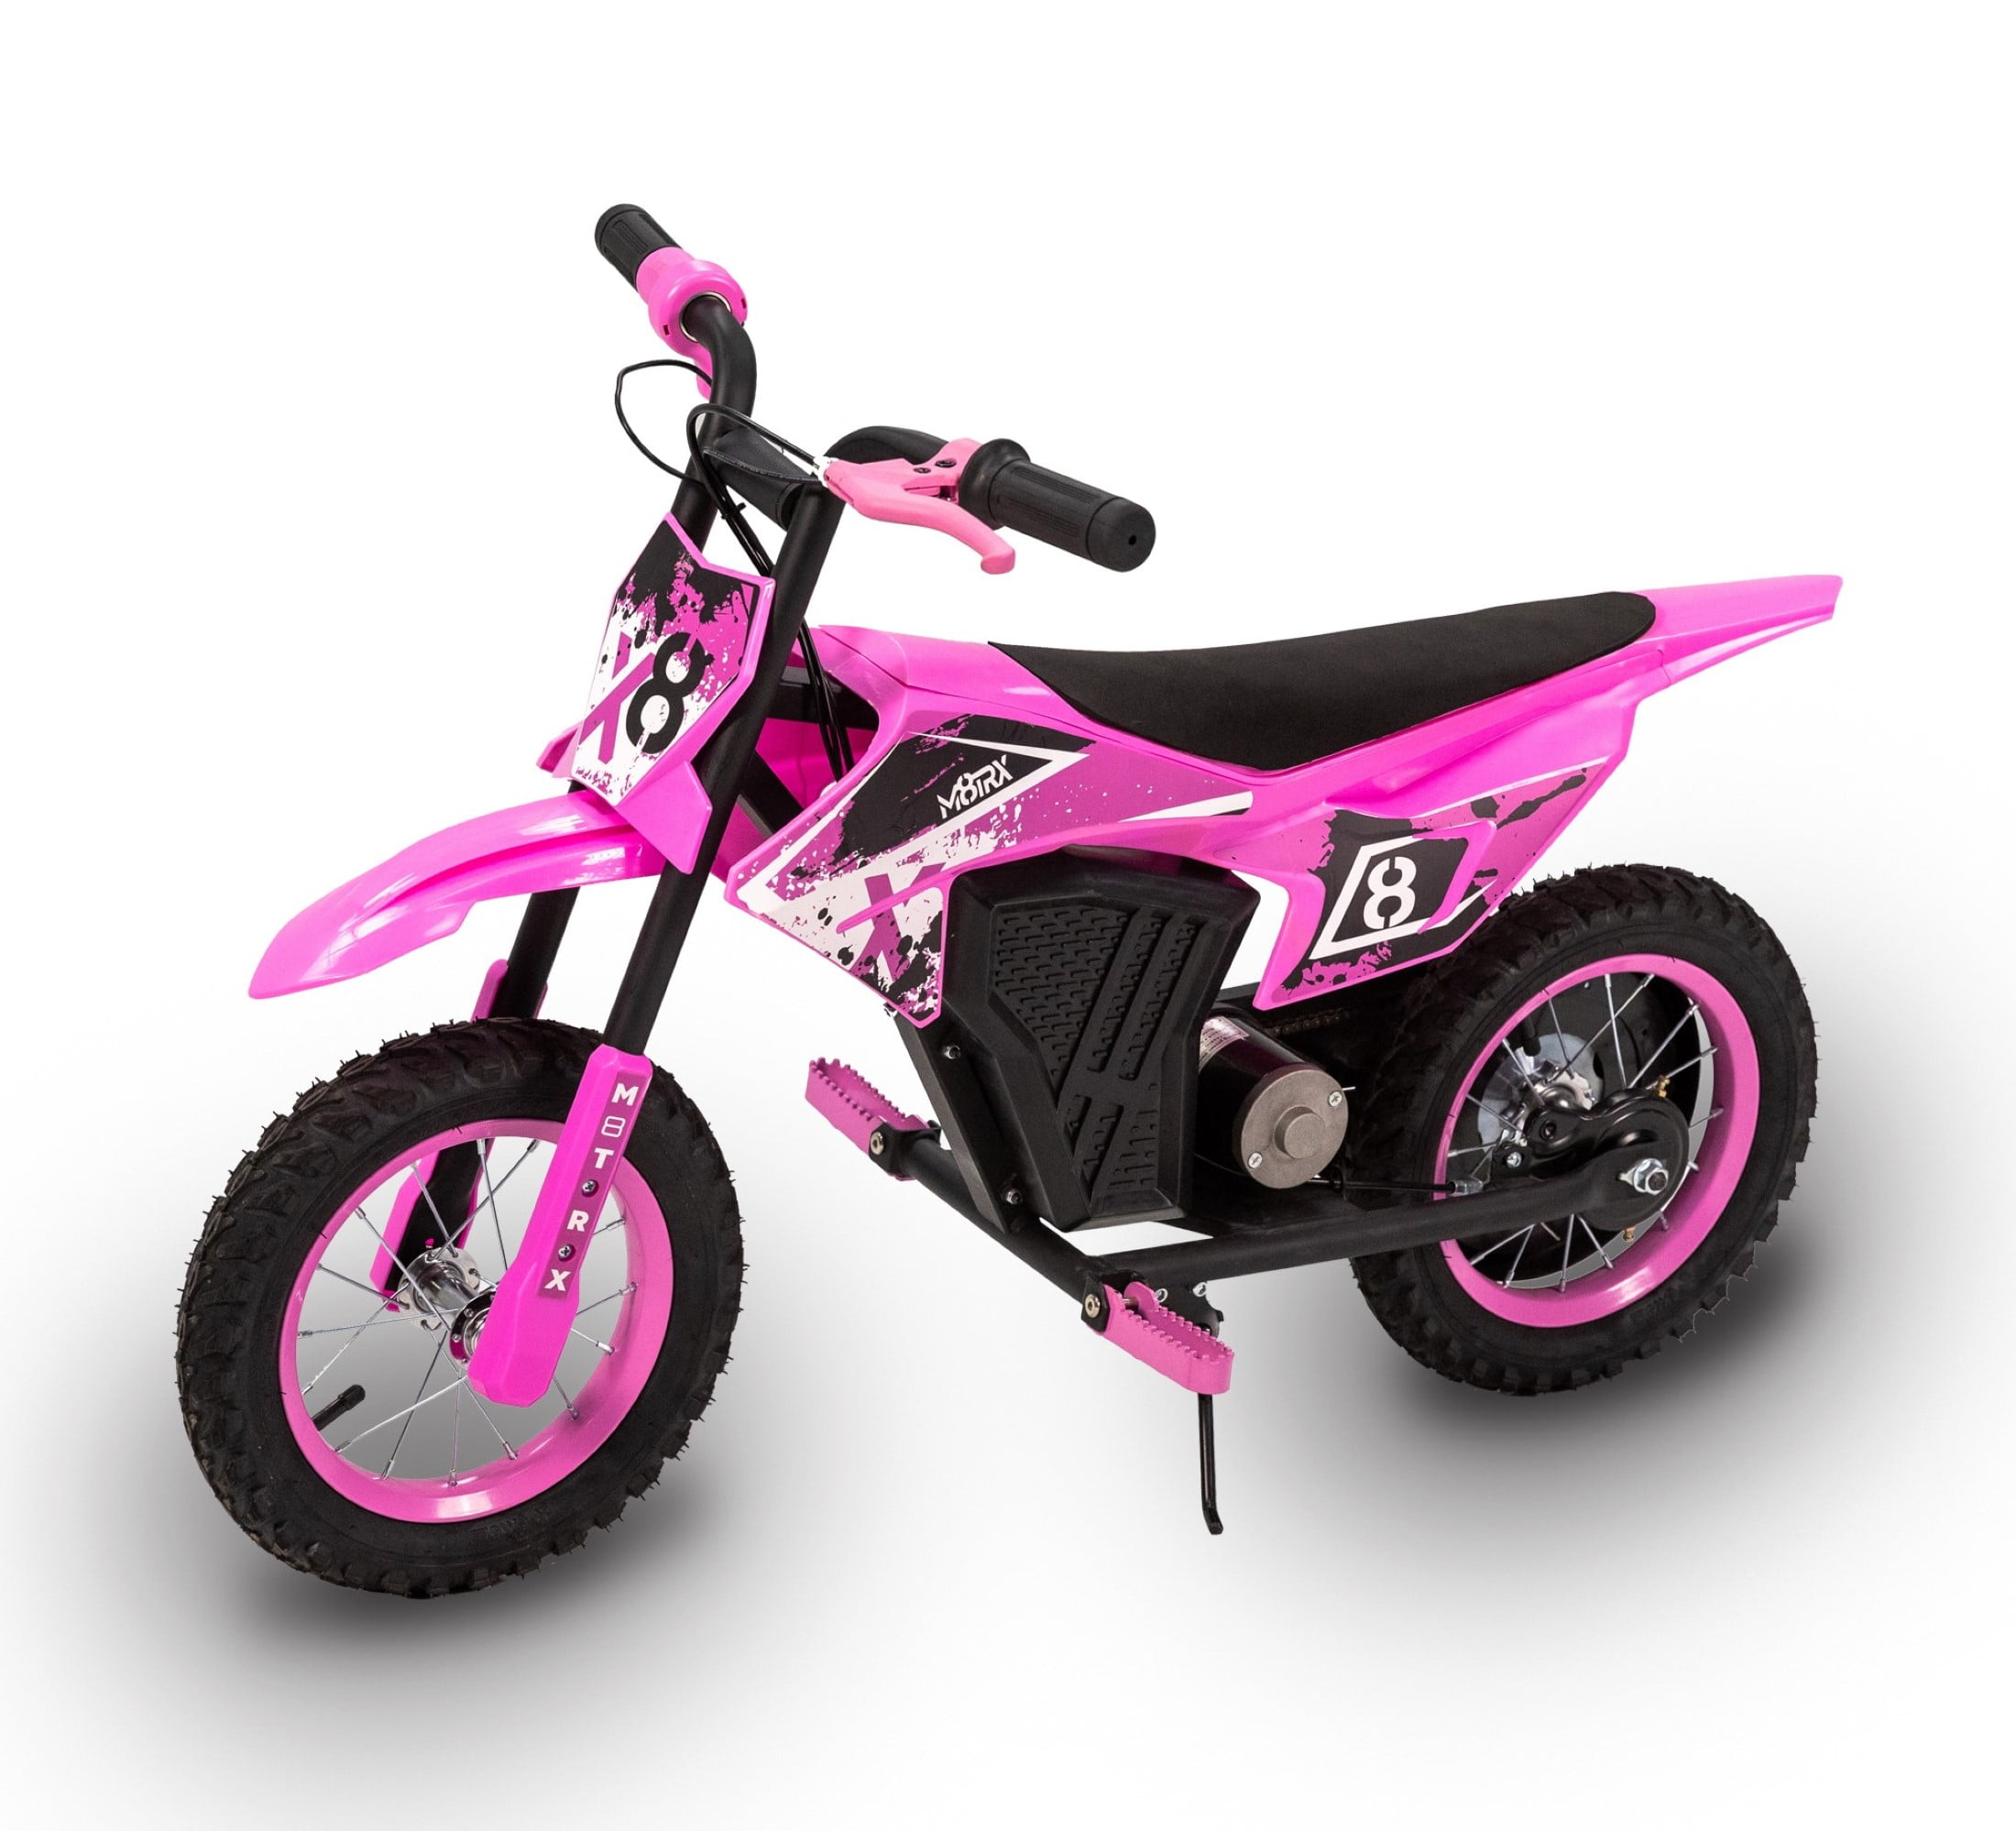 Hyper Toys HPR 350 Dirt Bike 24 Volt Electric Motorcycle in Pink,  Recommended for Ages 13 Years and Up